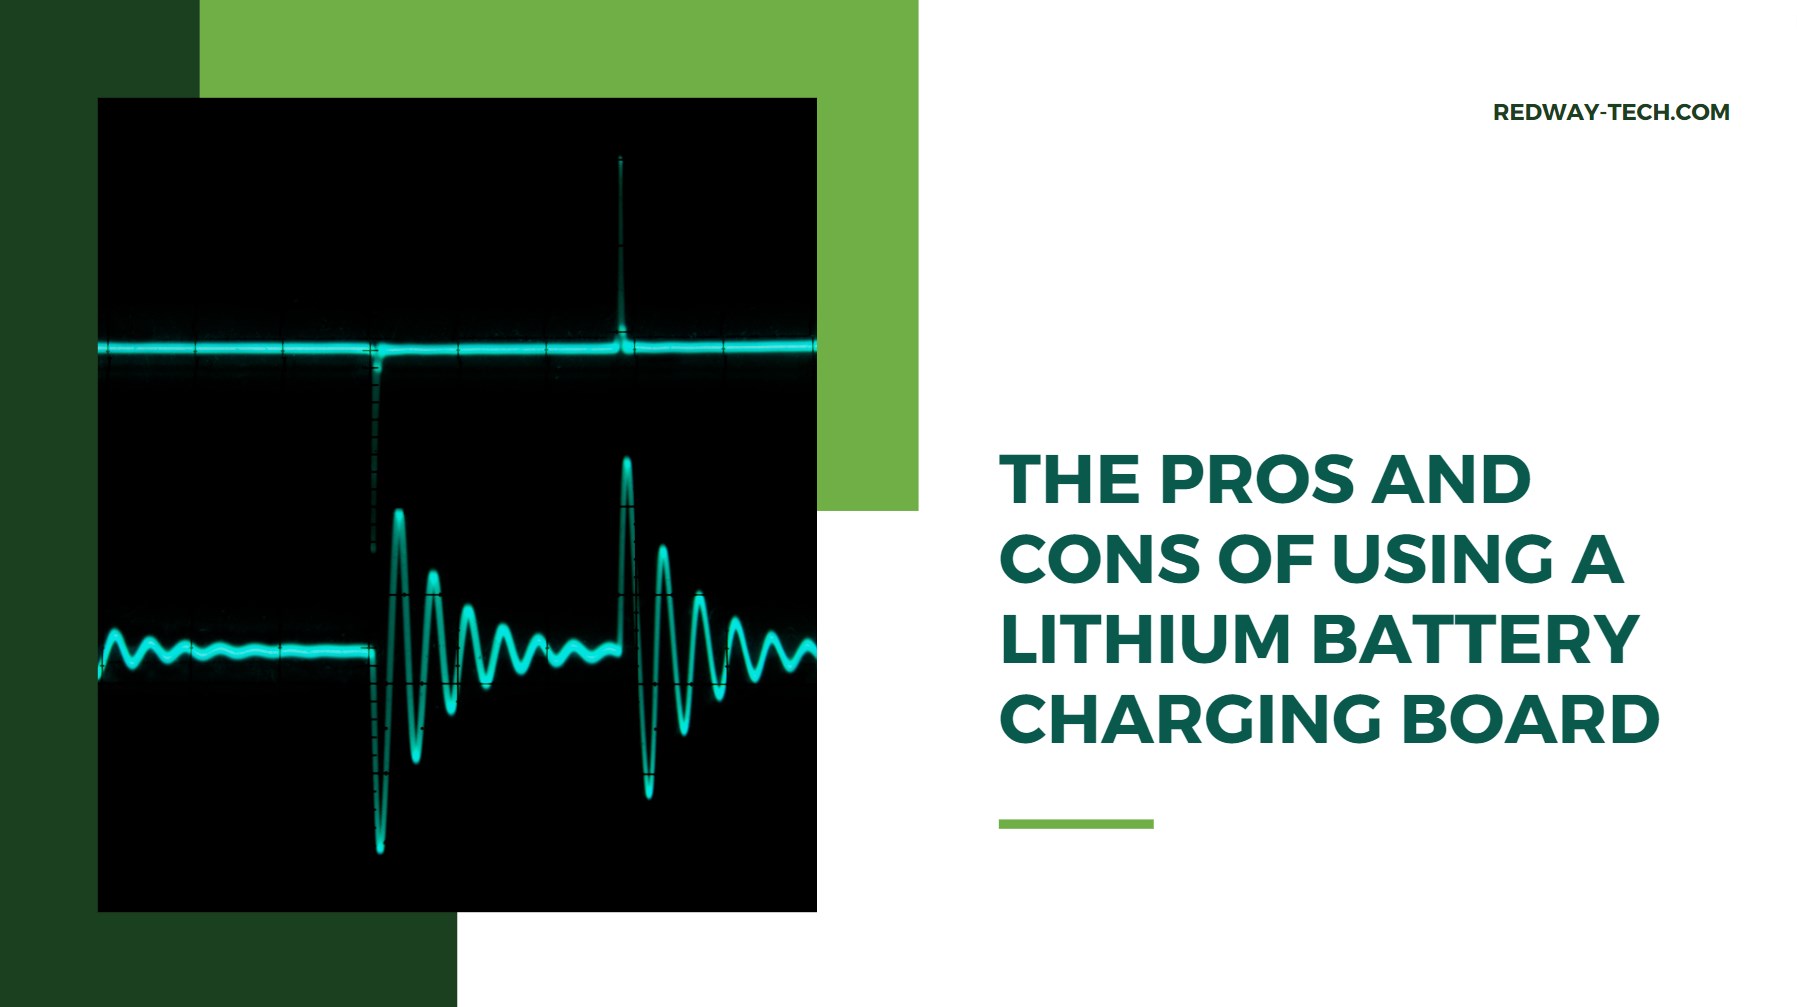 The Pros and Cons of Using a Lithium Battery Charging Board